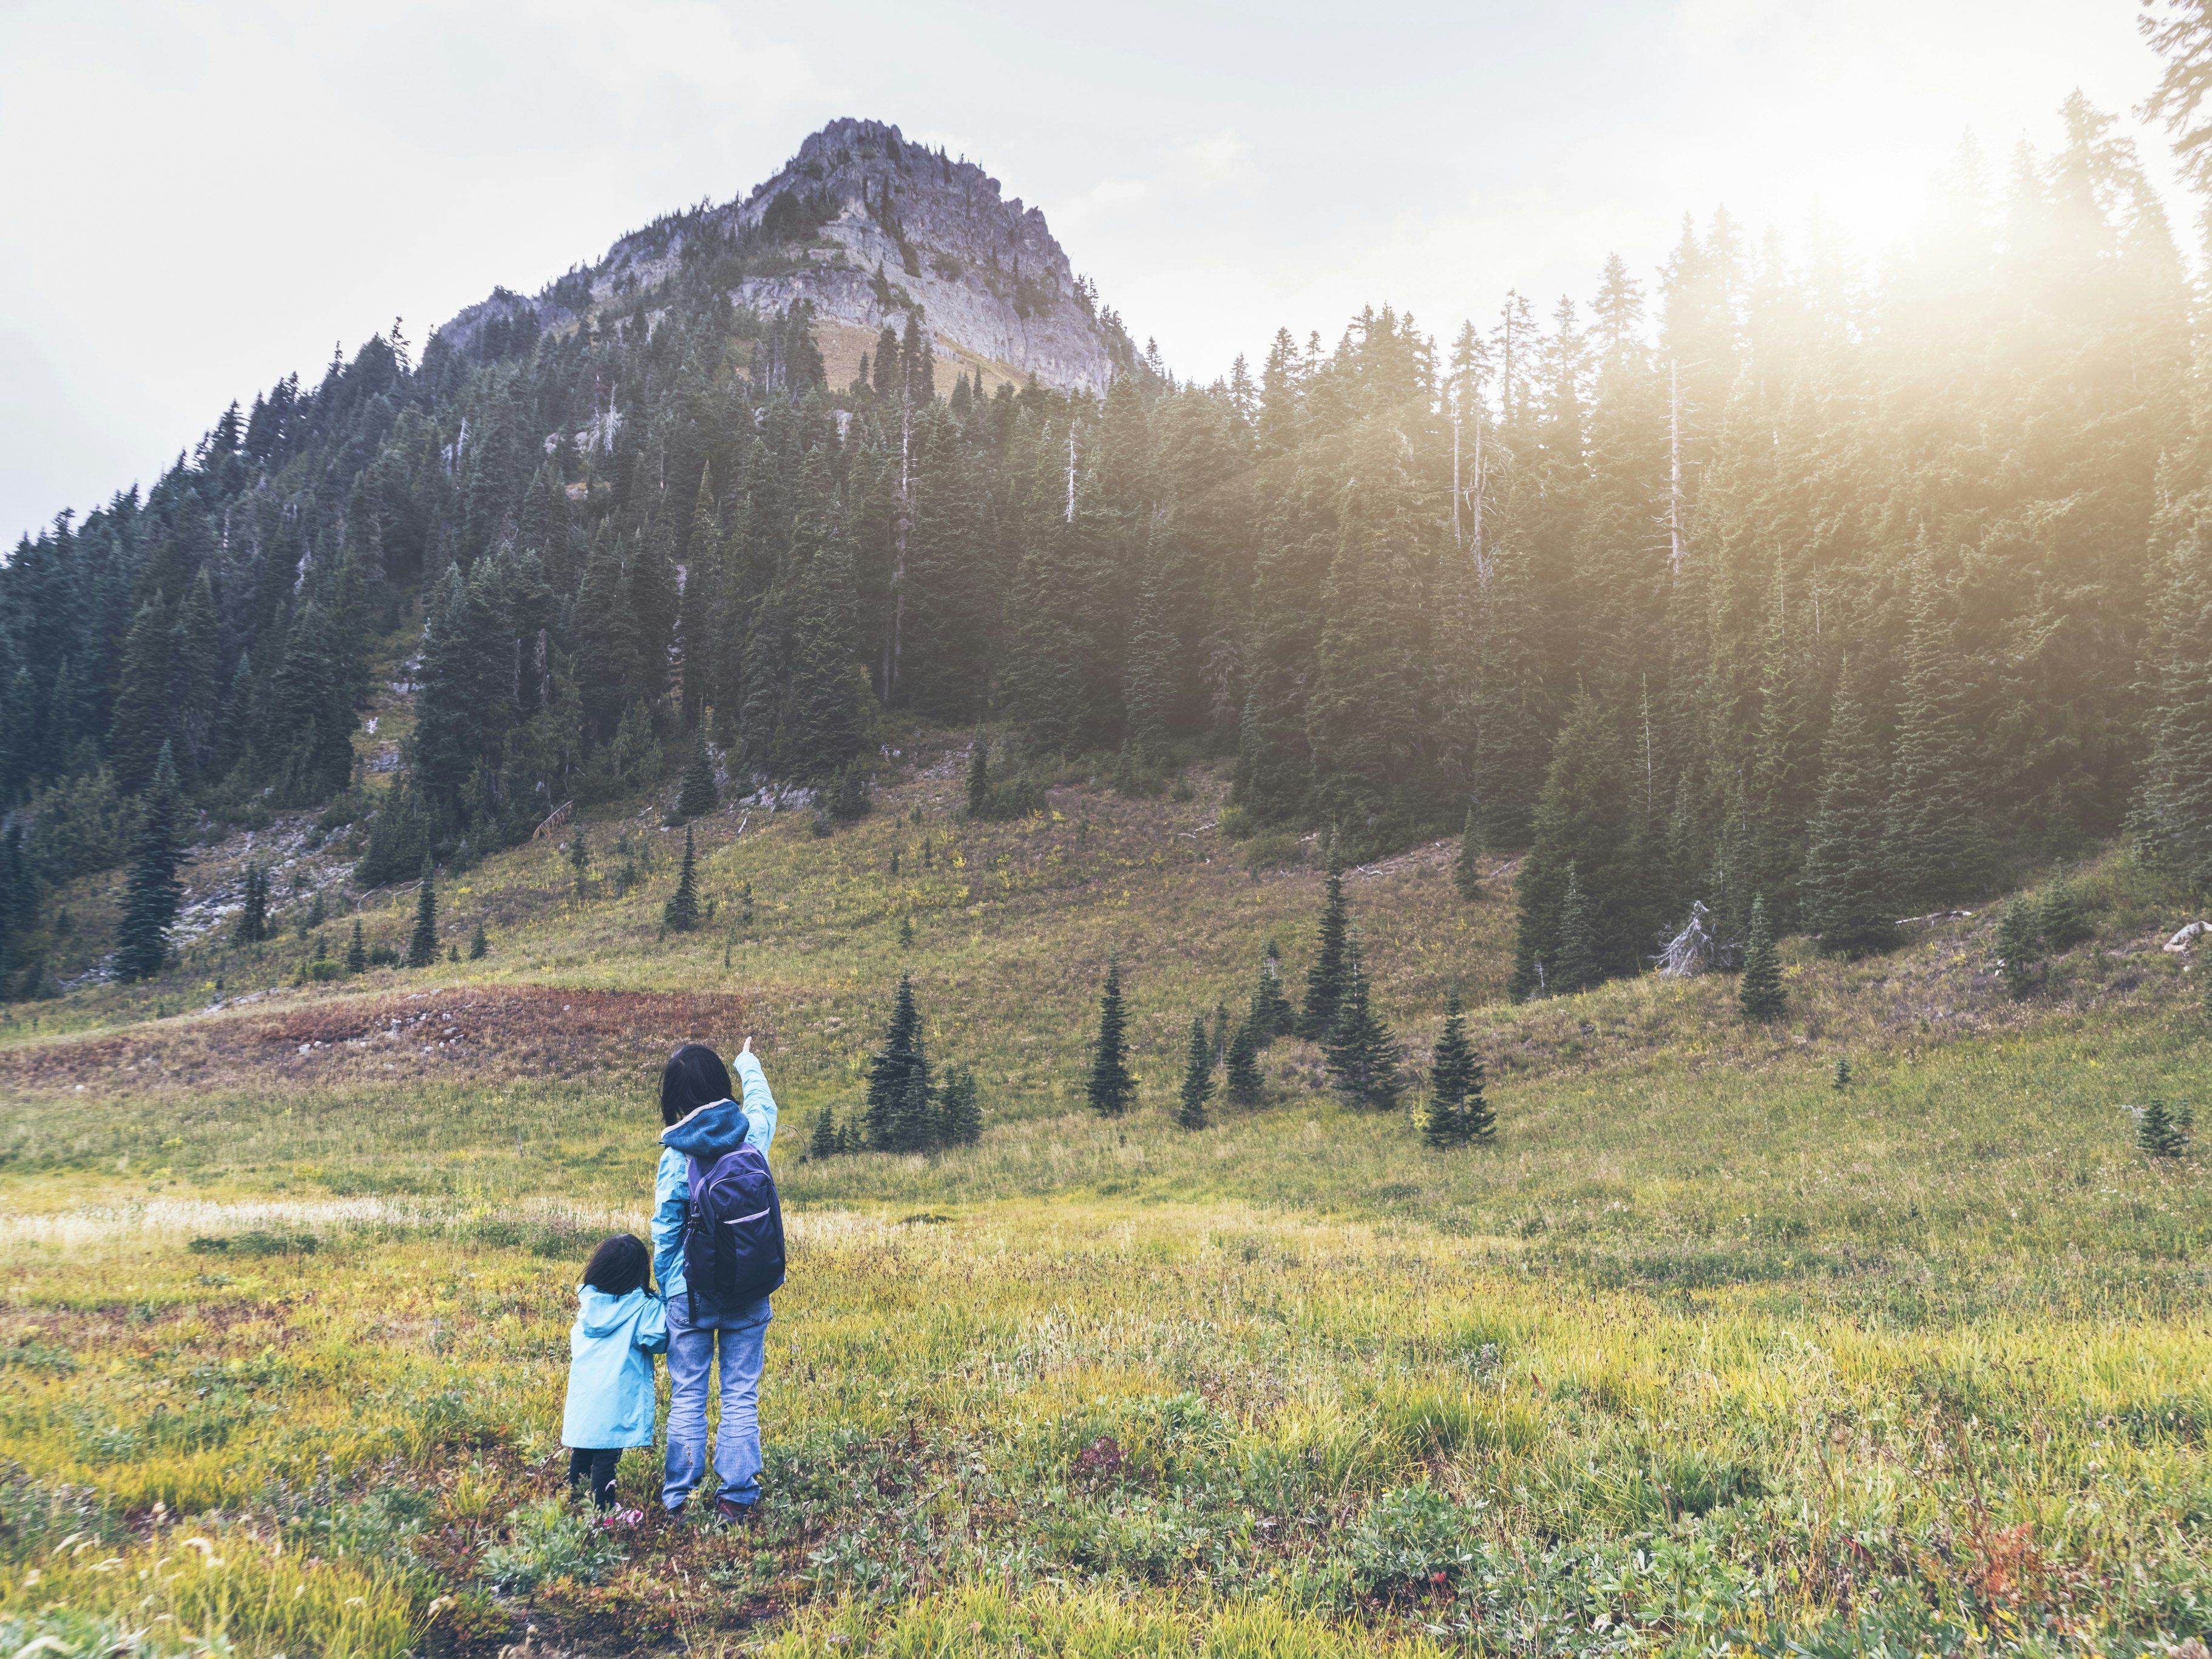 A mother and young daughter in Mt Rainier National Park pause to look up at the peaks as the sun bursts through